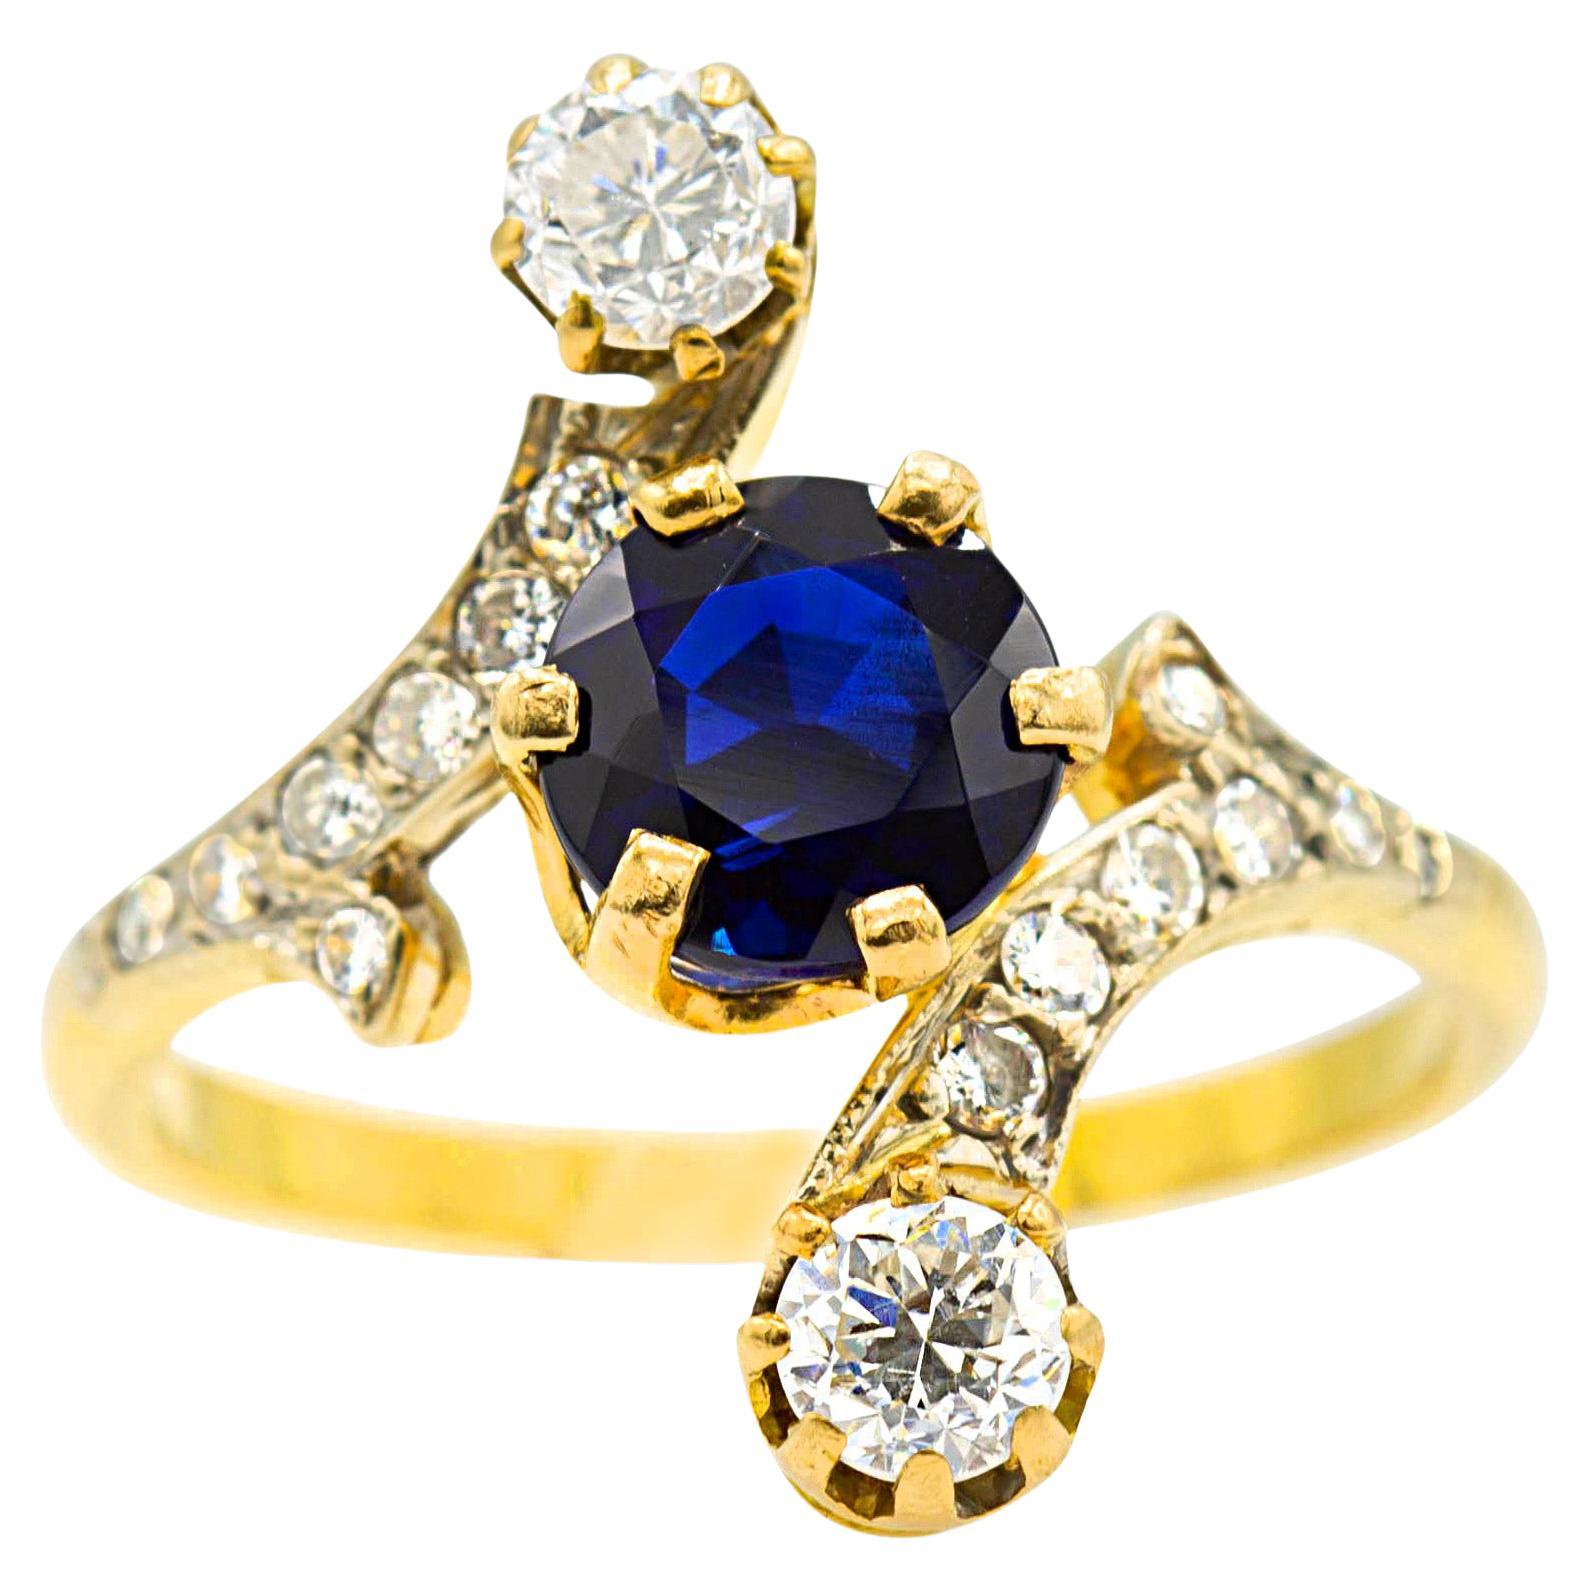 Belle Epoque 1.36 Ct. Natural Unheated Sapphire Ring in 18k Yellow Gold For Sale